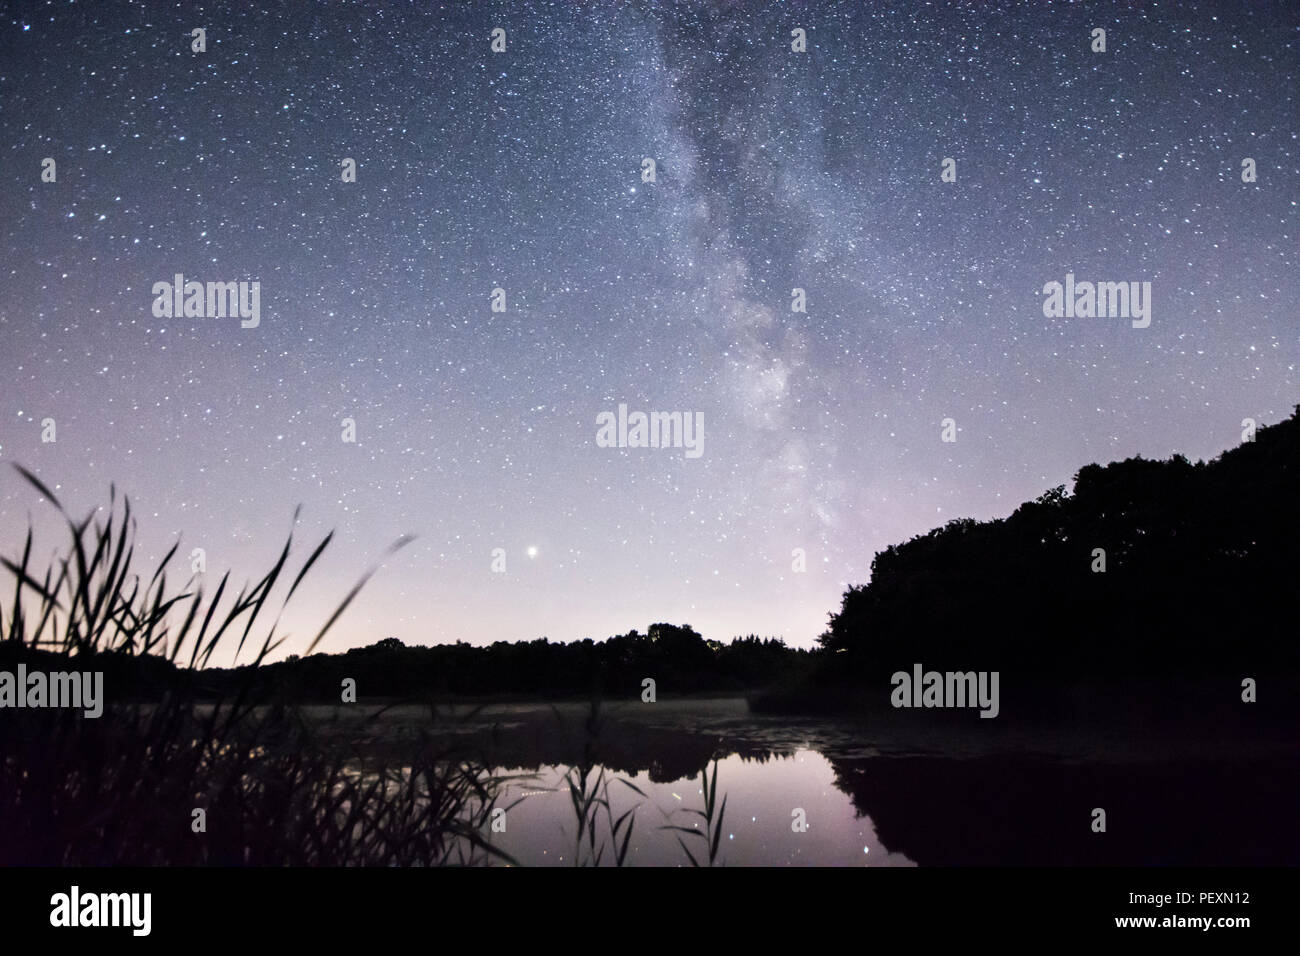 The Milky Way galaxy seen over Burton Mill Pond, The South Downs National Park, Petworth, Sussex, UK. August. Night. Stock Photo